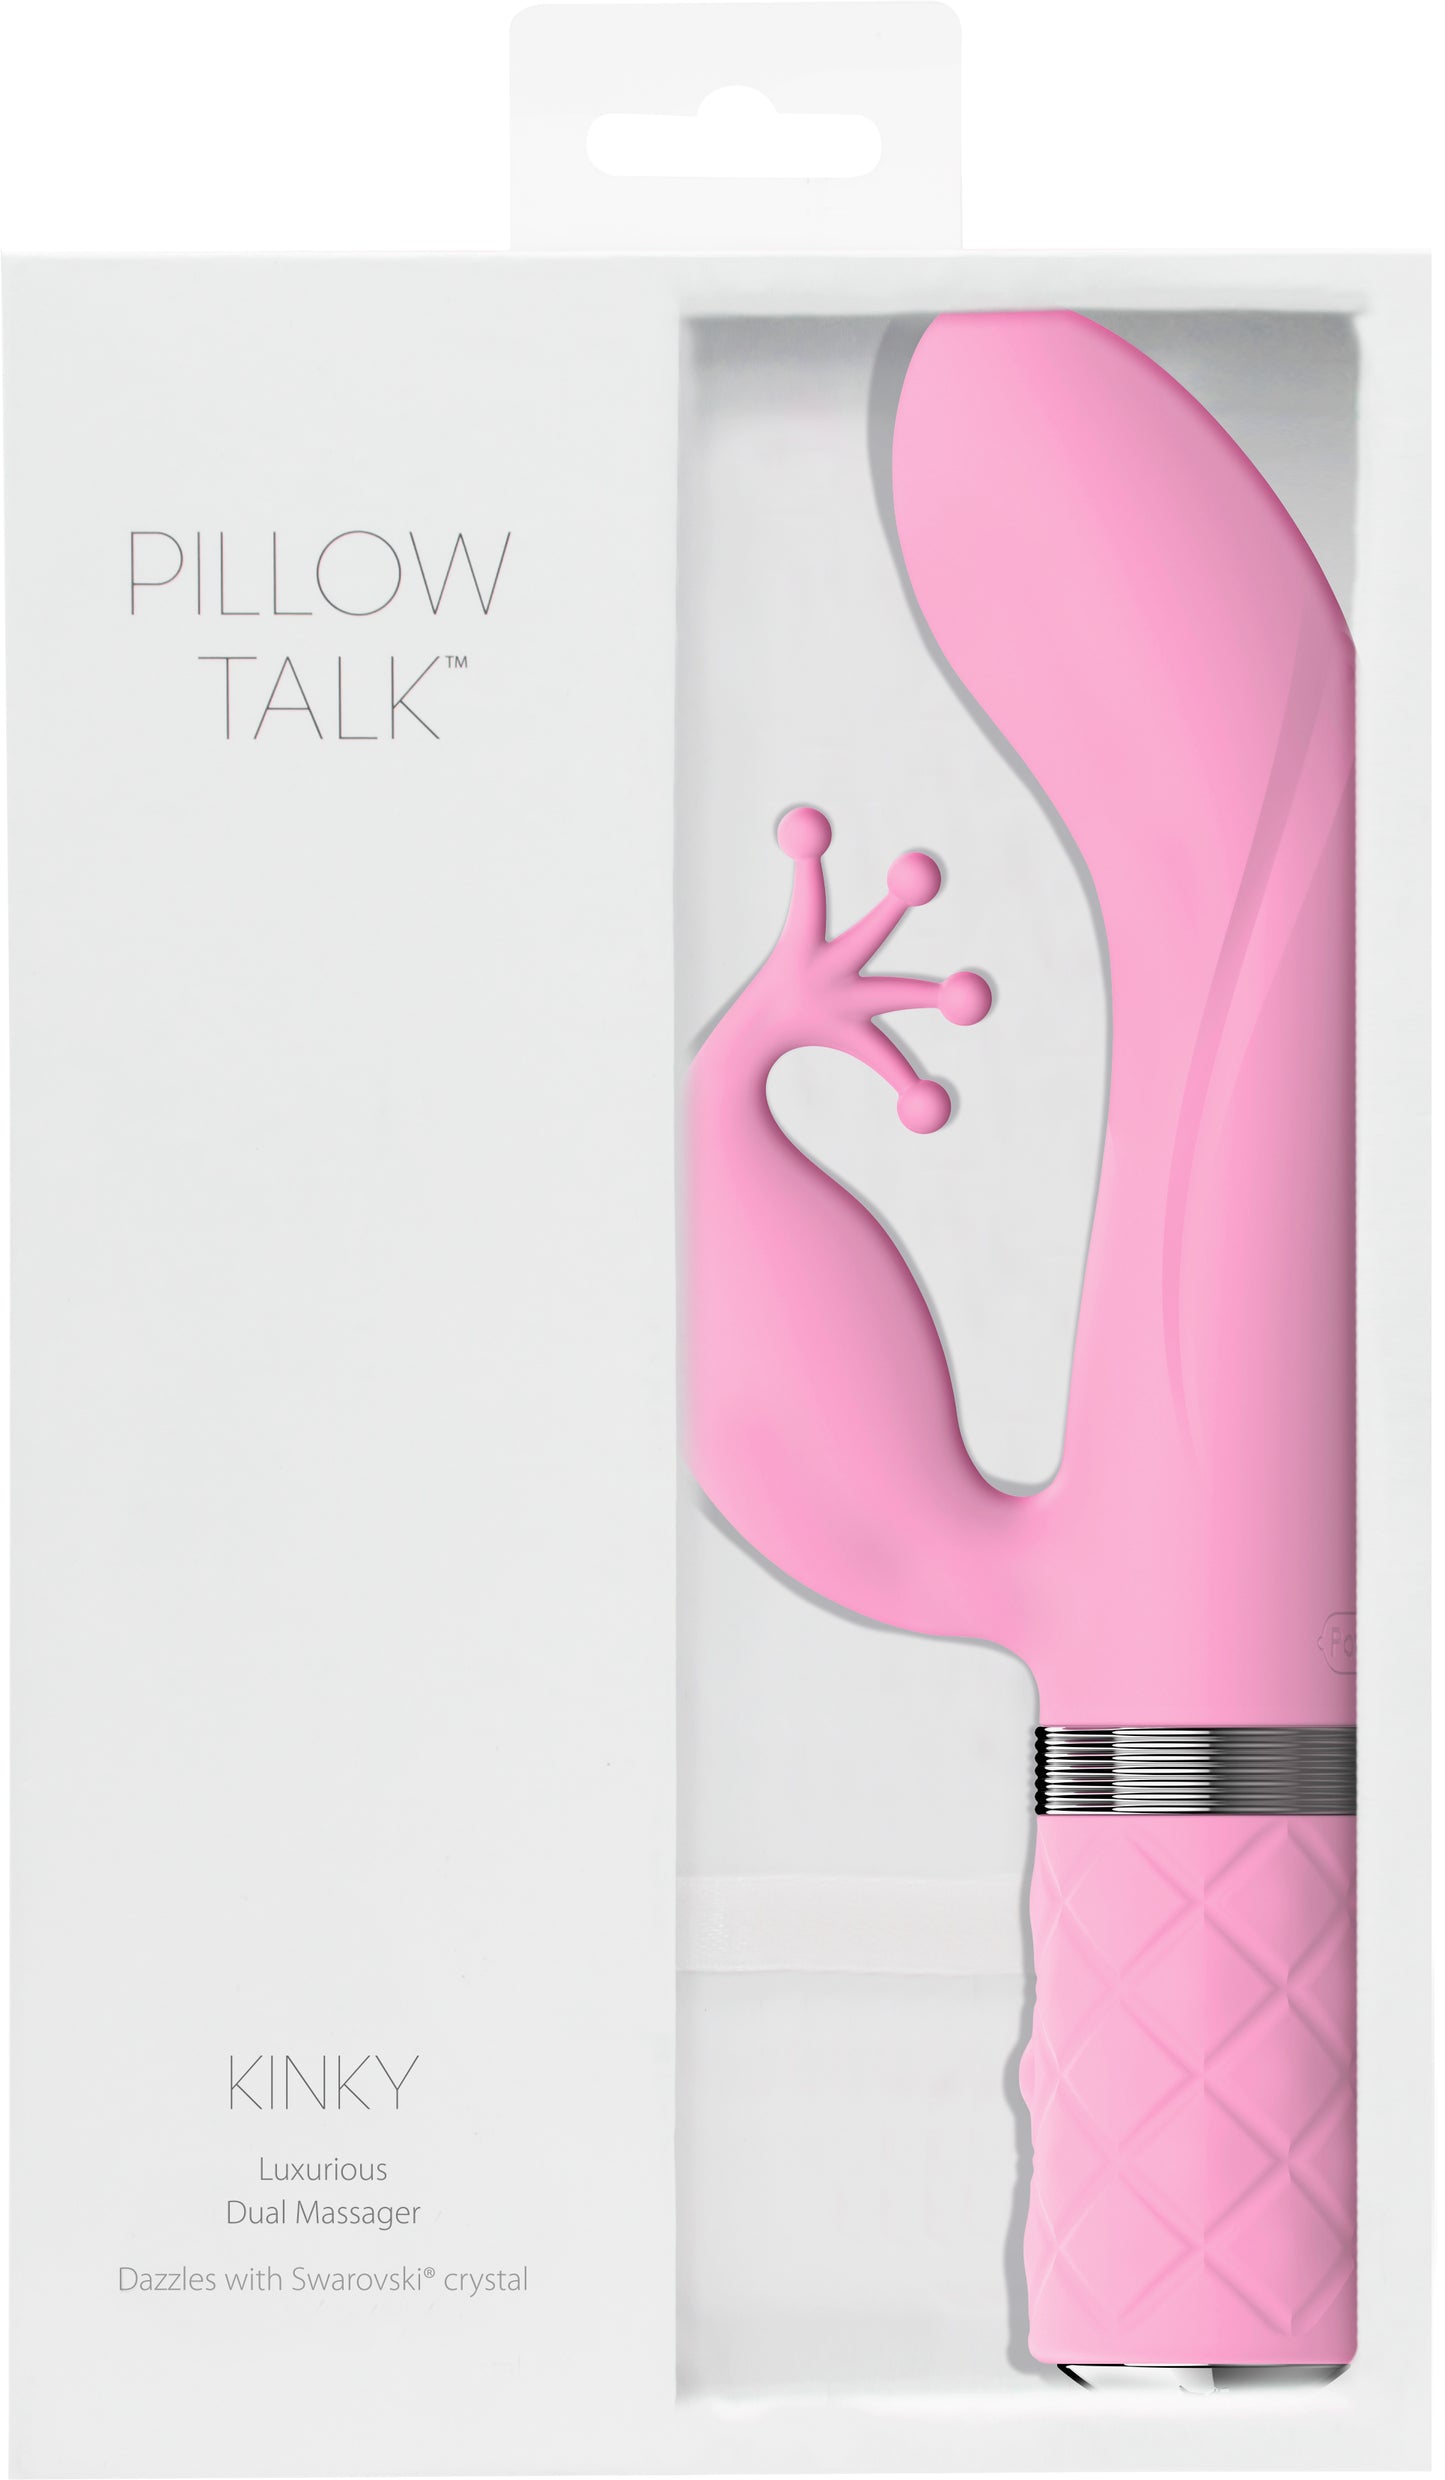 Pillow Talk Kinky Clitoral Stimulator With Swarovski Crystal Pink - Just for you desires